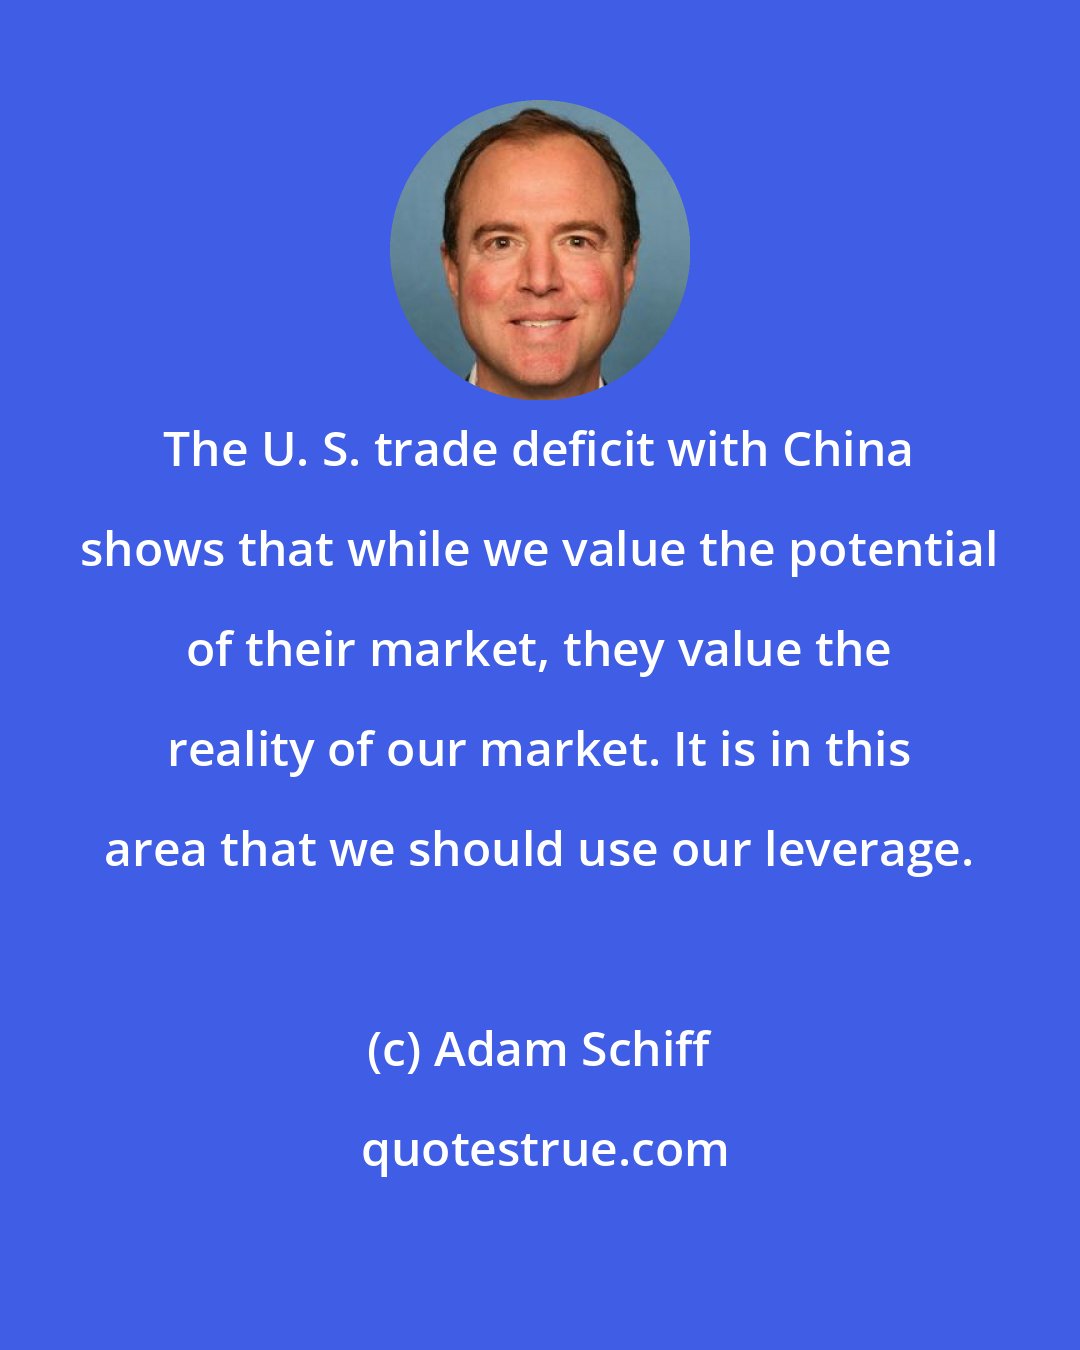 Adam Schiff: The U. S. trade deficit with China shows that while we value the potential of their market, they value the reality of our market. It is in this area that we should use our leverage.